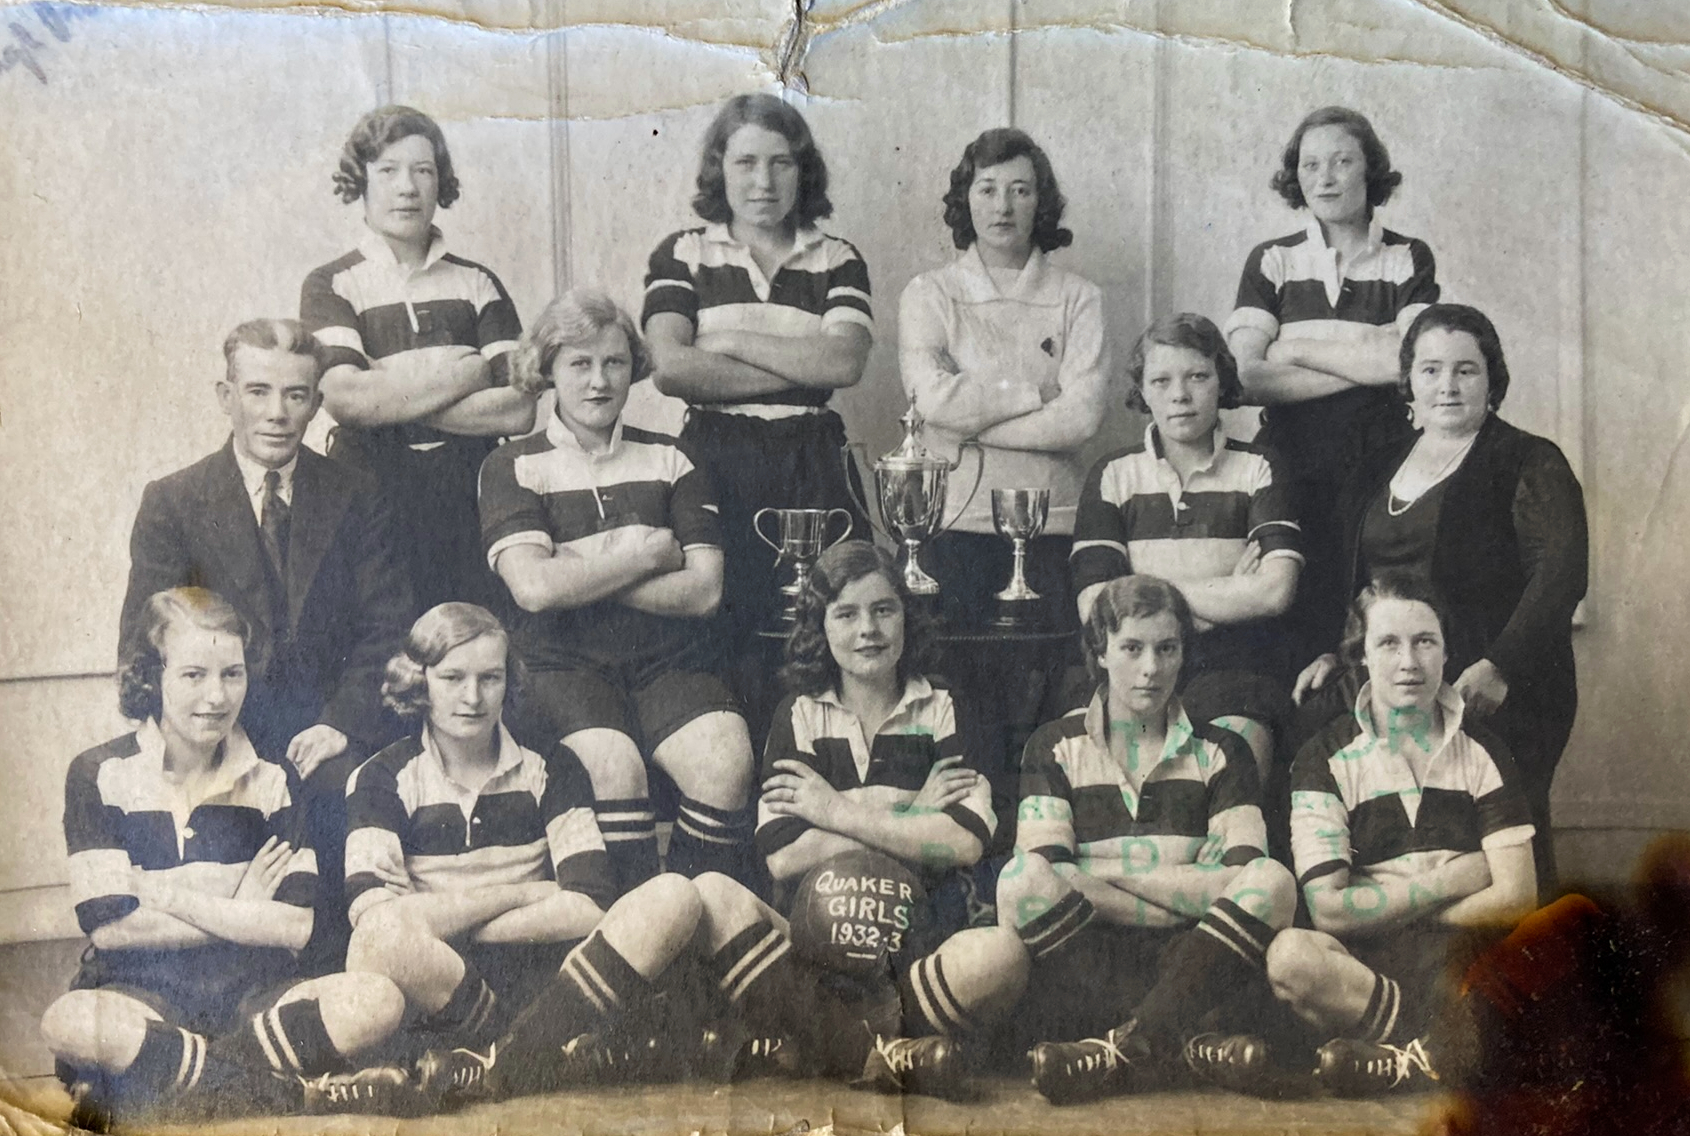 The Darlington Quaker Ladies team photo with the cups they had won during the 1931-32 season. Lillie Galloway is on the right and her husband, James, is on the left